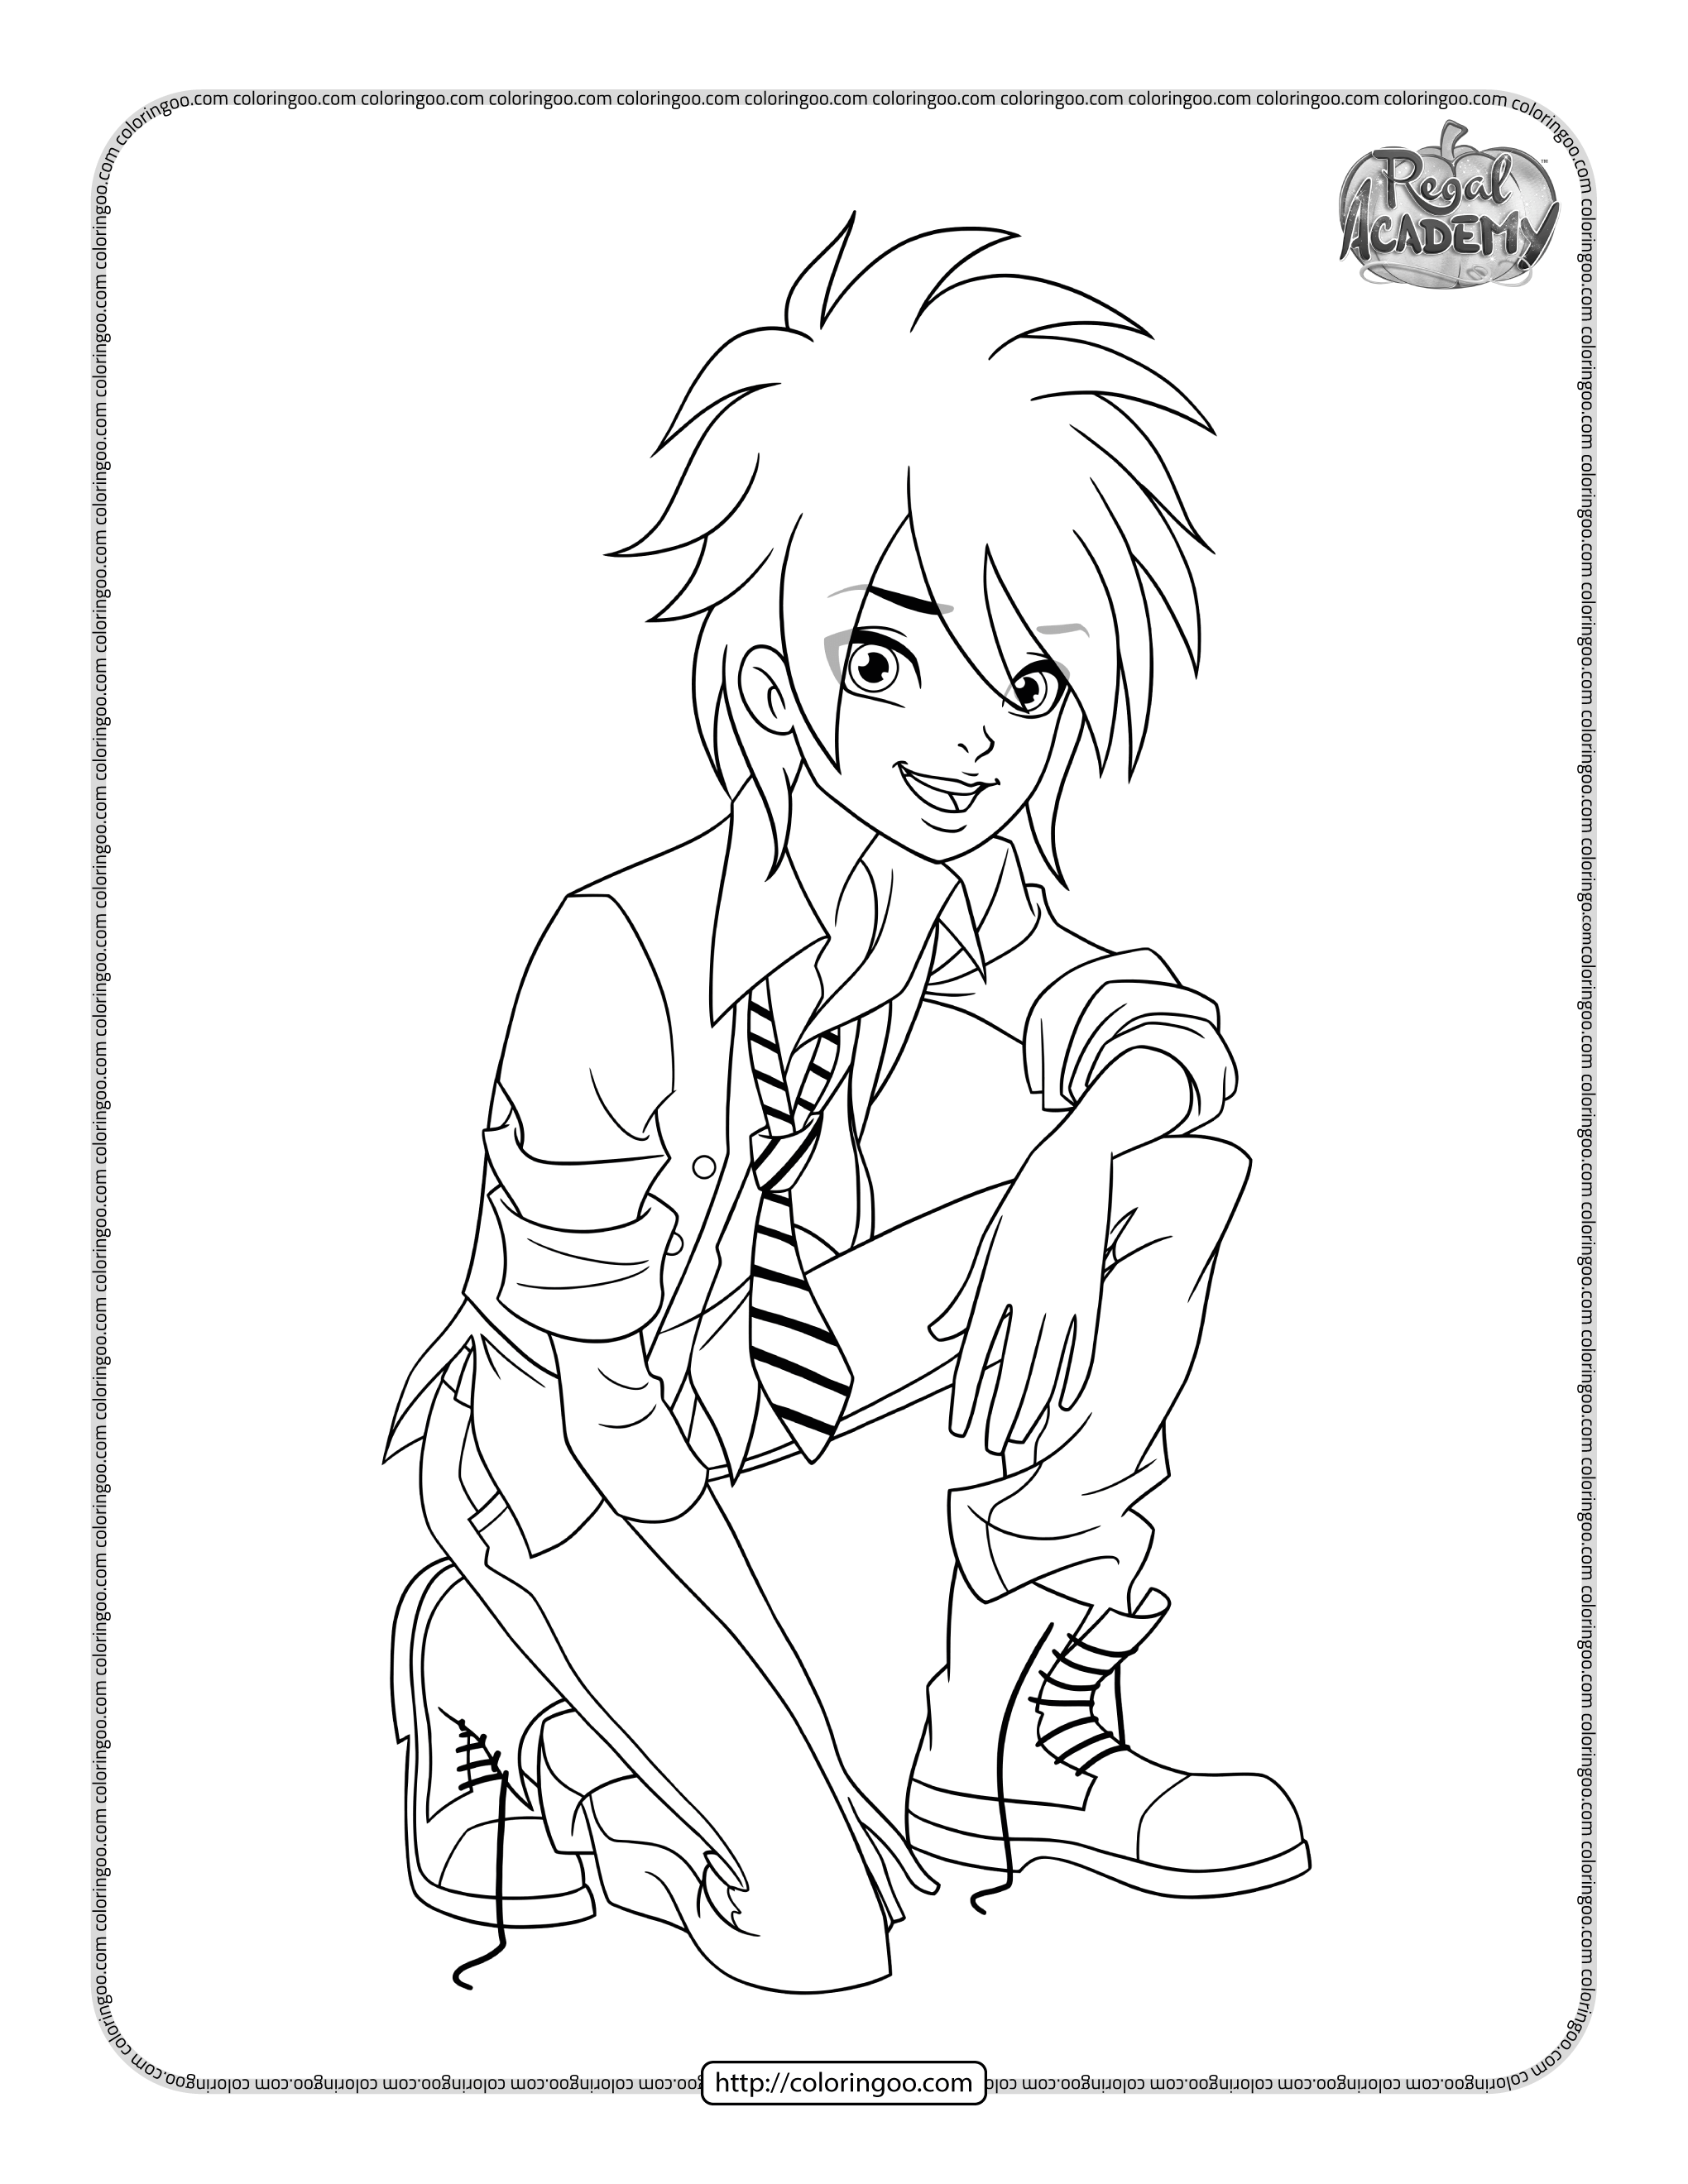 regal academy travis beast coloring pages